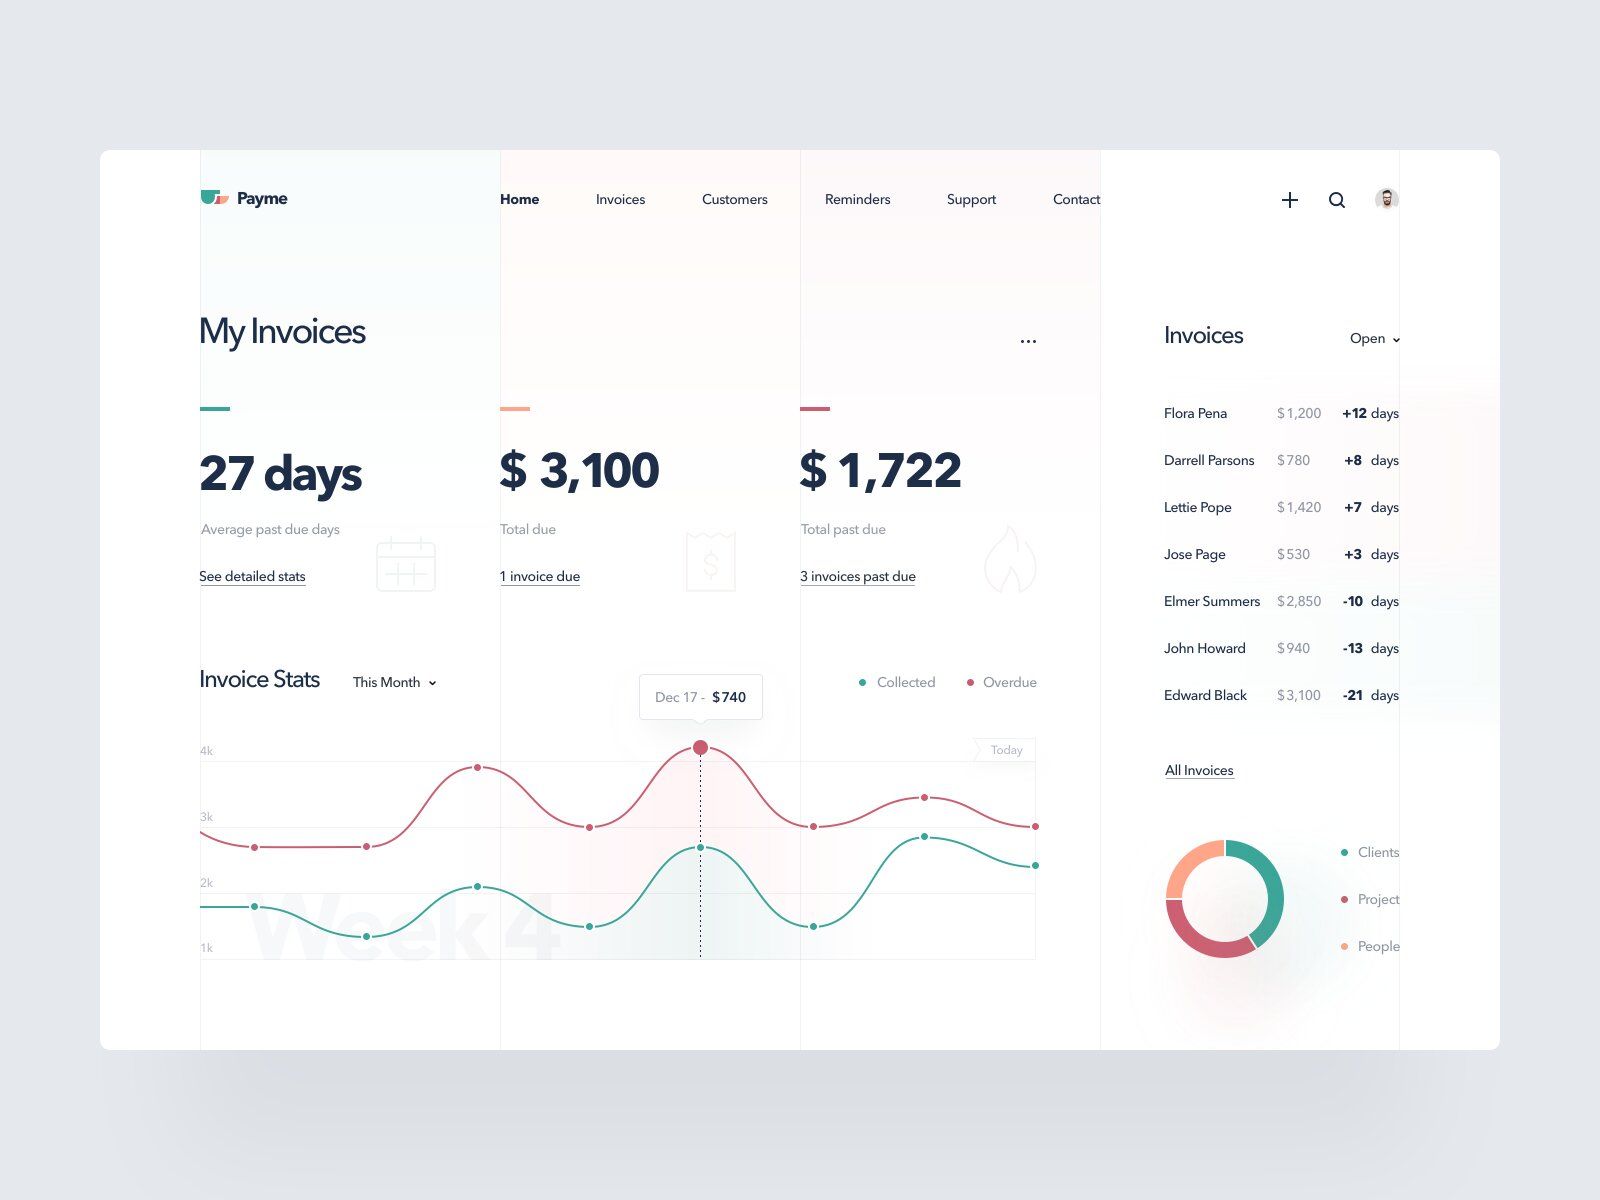 A case management software development company in the legal industry normally offers extended financial management technology for firms and each user (*image by [Den Klenkov](https://dribbble.com/denklenkov){ rel="nofollow" target="_blank" .default-md}*)